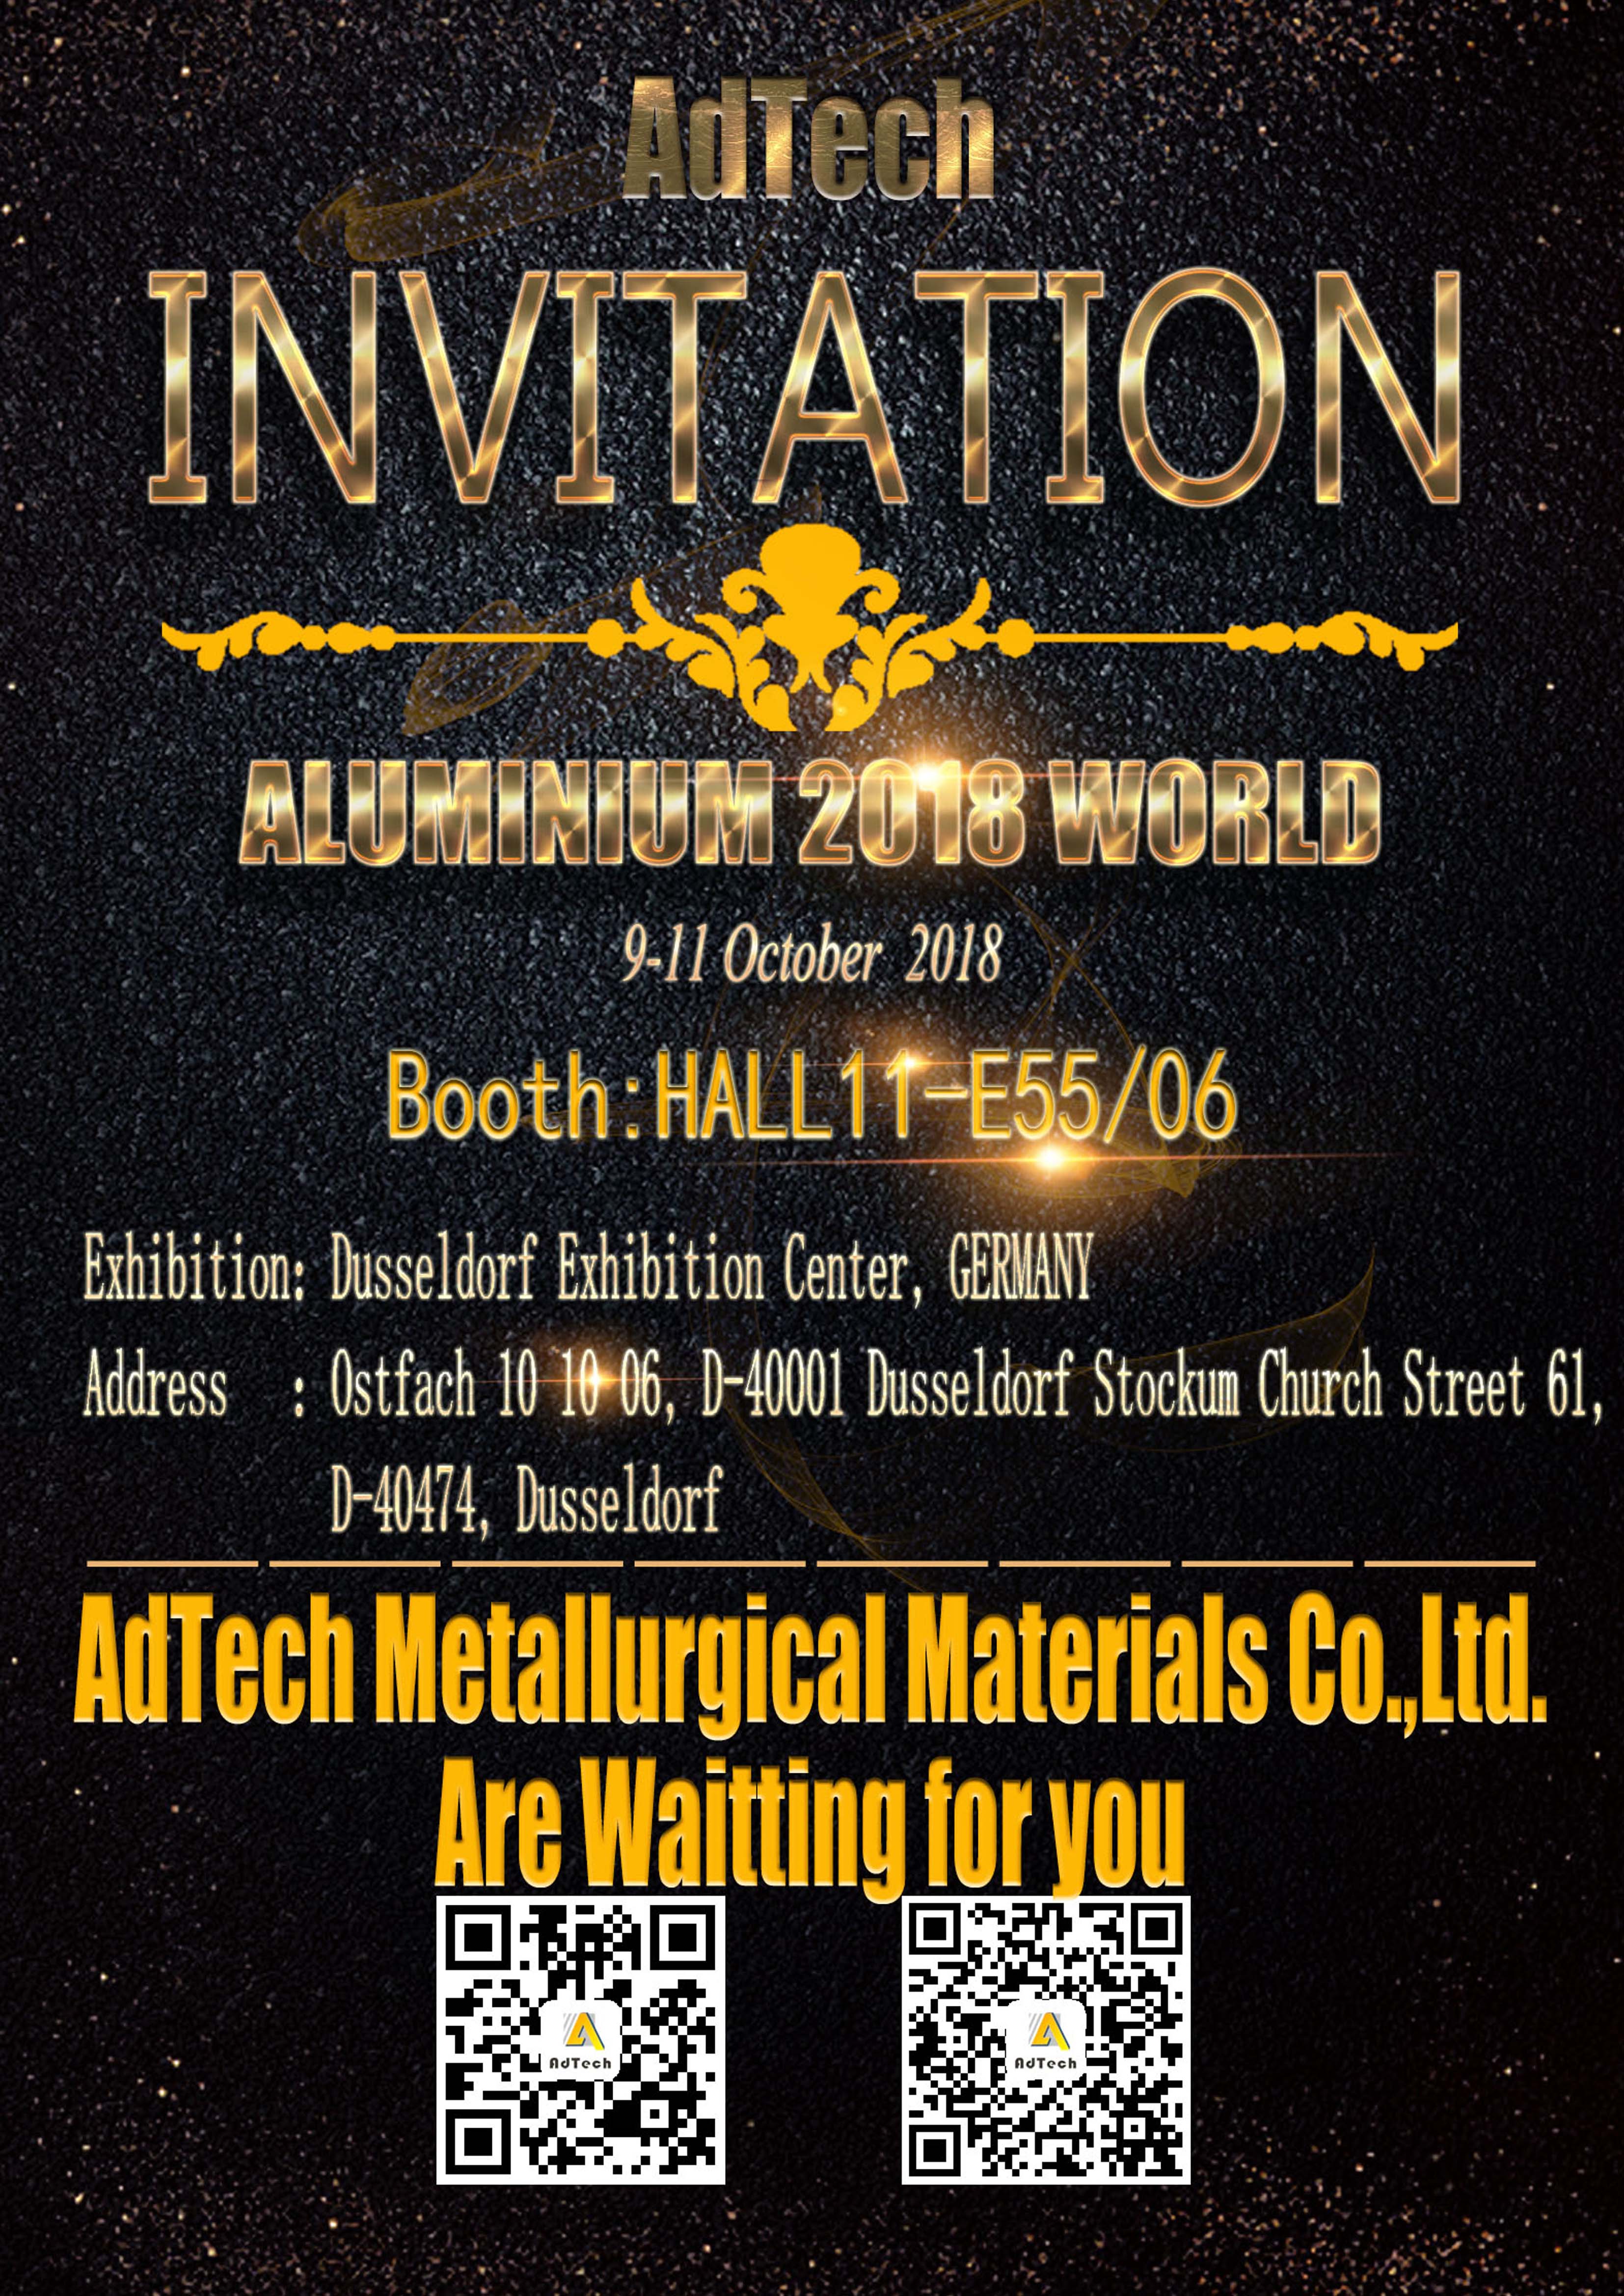 AdTech will Participate in the exhibition of 2018 German Aluminum